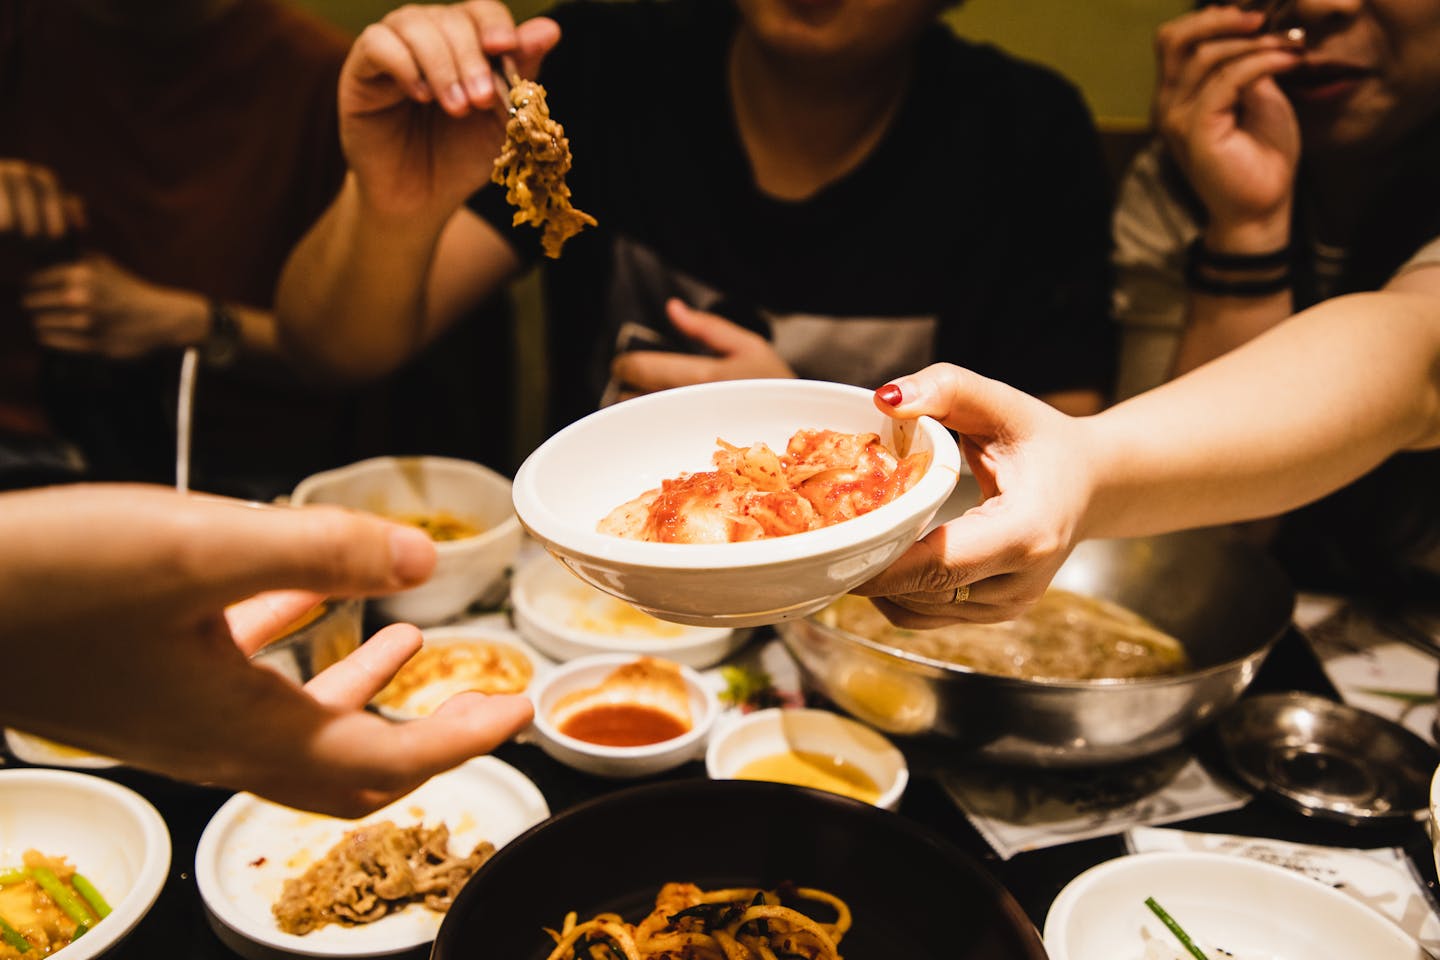 Person passing a dish of kimchi to another person across a table of food